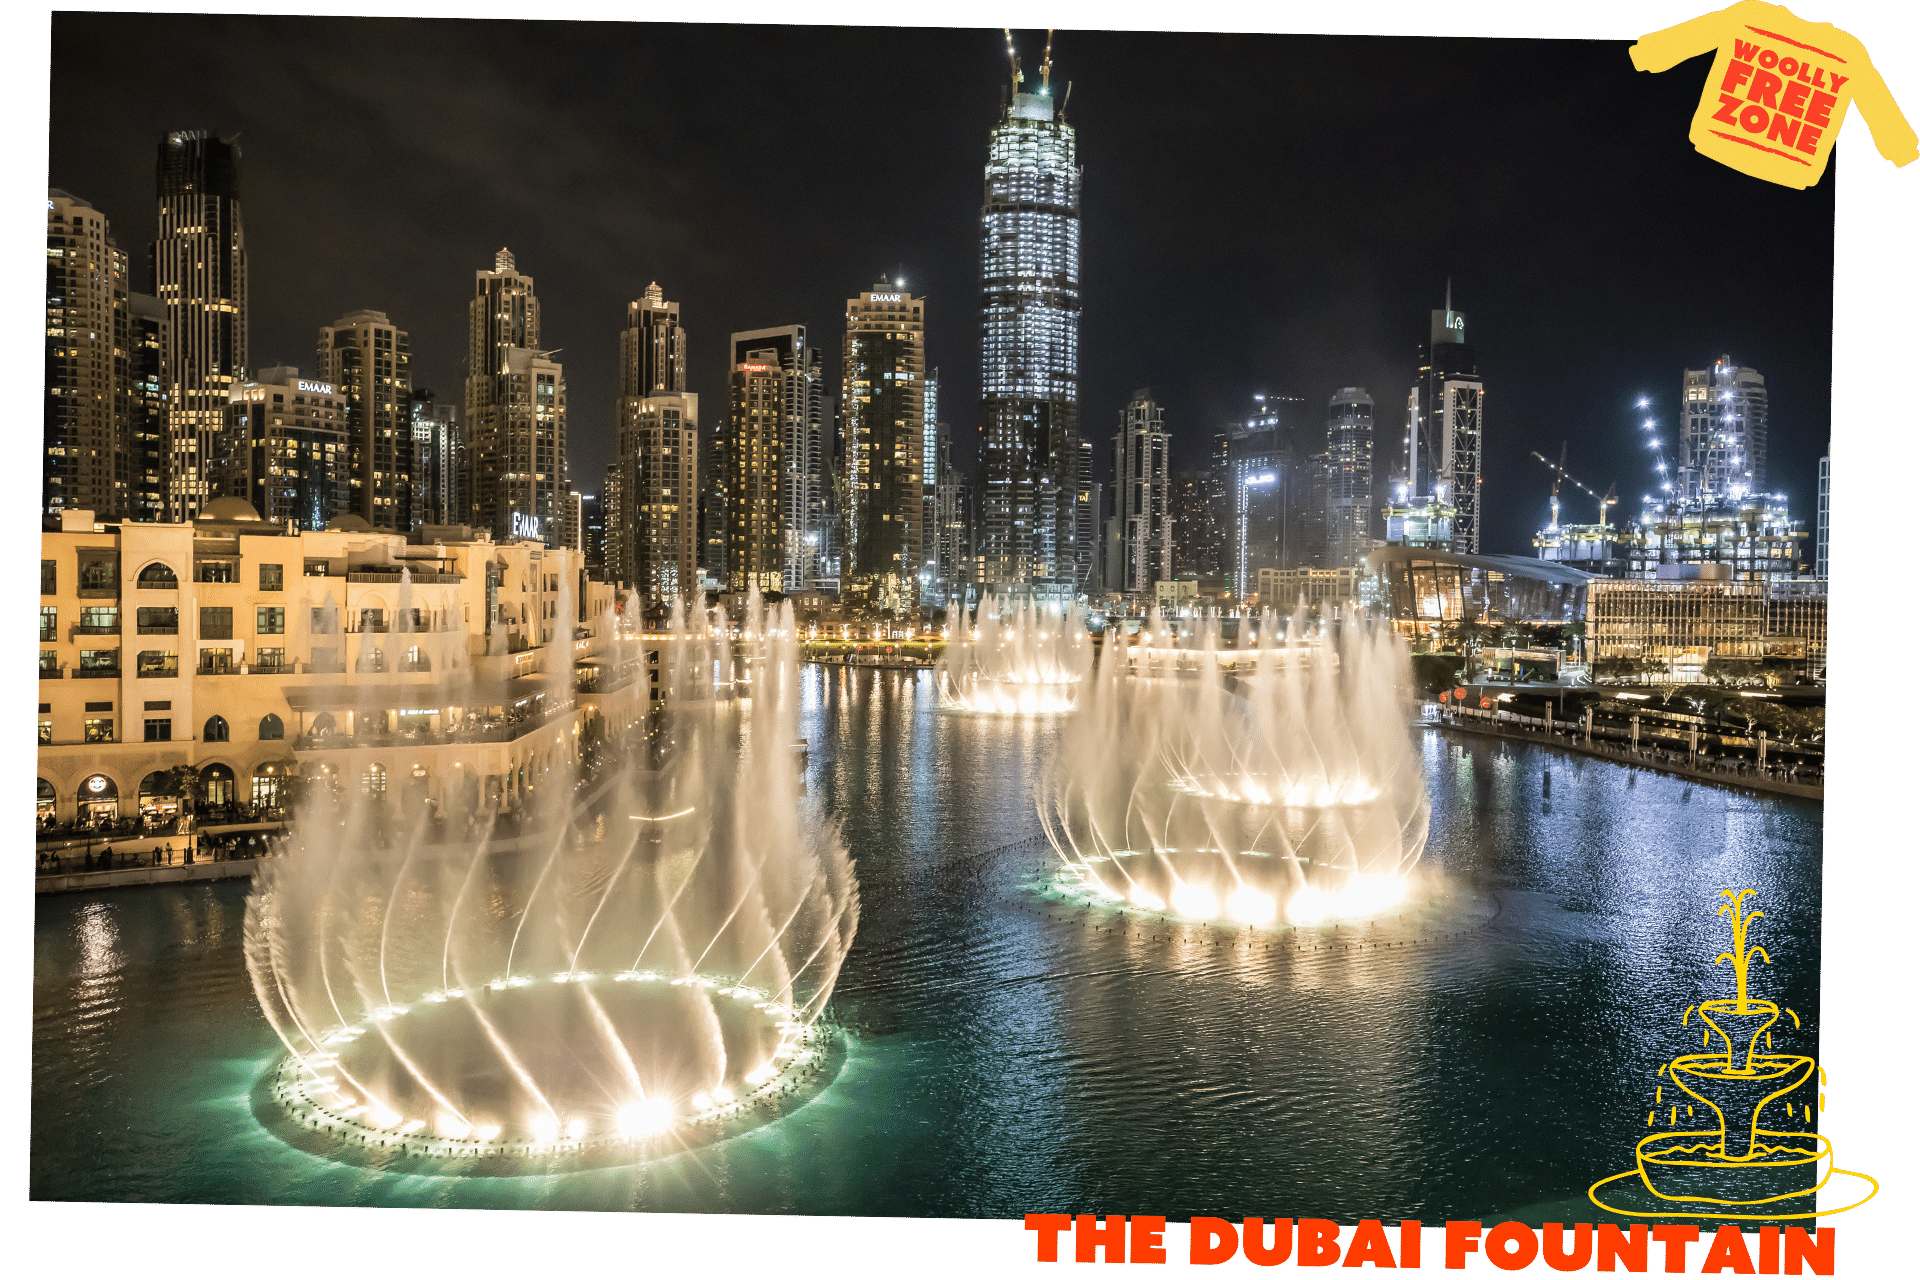 The Dubai Fountain is one of the best free winter activities in Dubai. At night, jets of water, shaped in circles, shoot up from a lake surrounded by glowing skyscrapers.